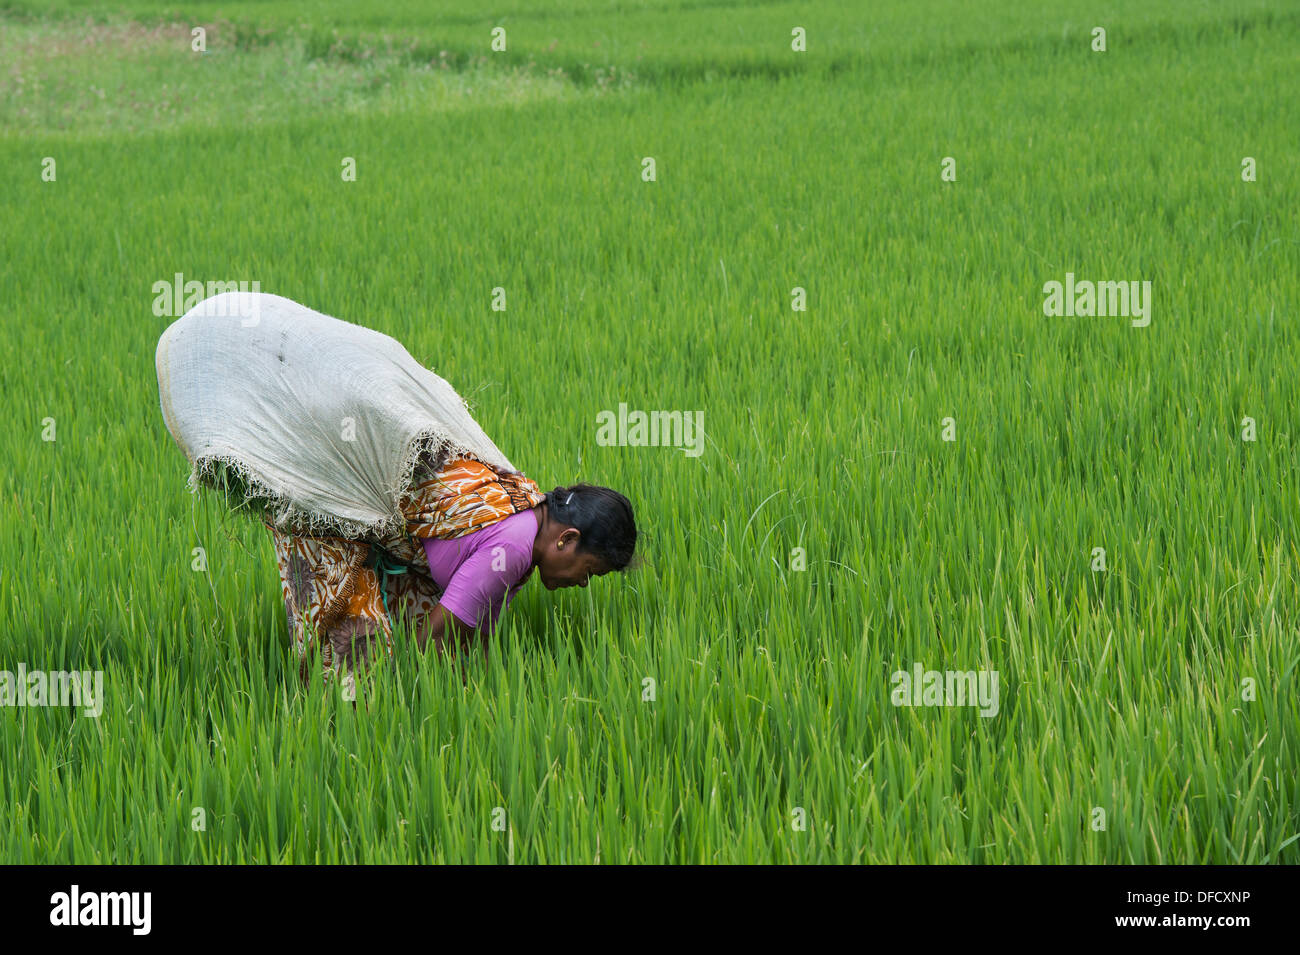 Indian woman cutting grass in between the rice plants in a paddy field. Andhra Pradesh, India Stock Photo